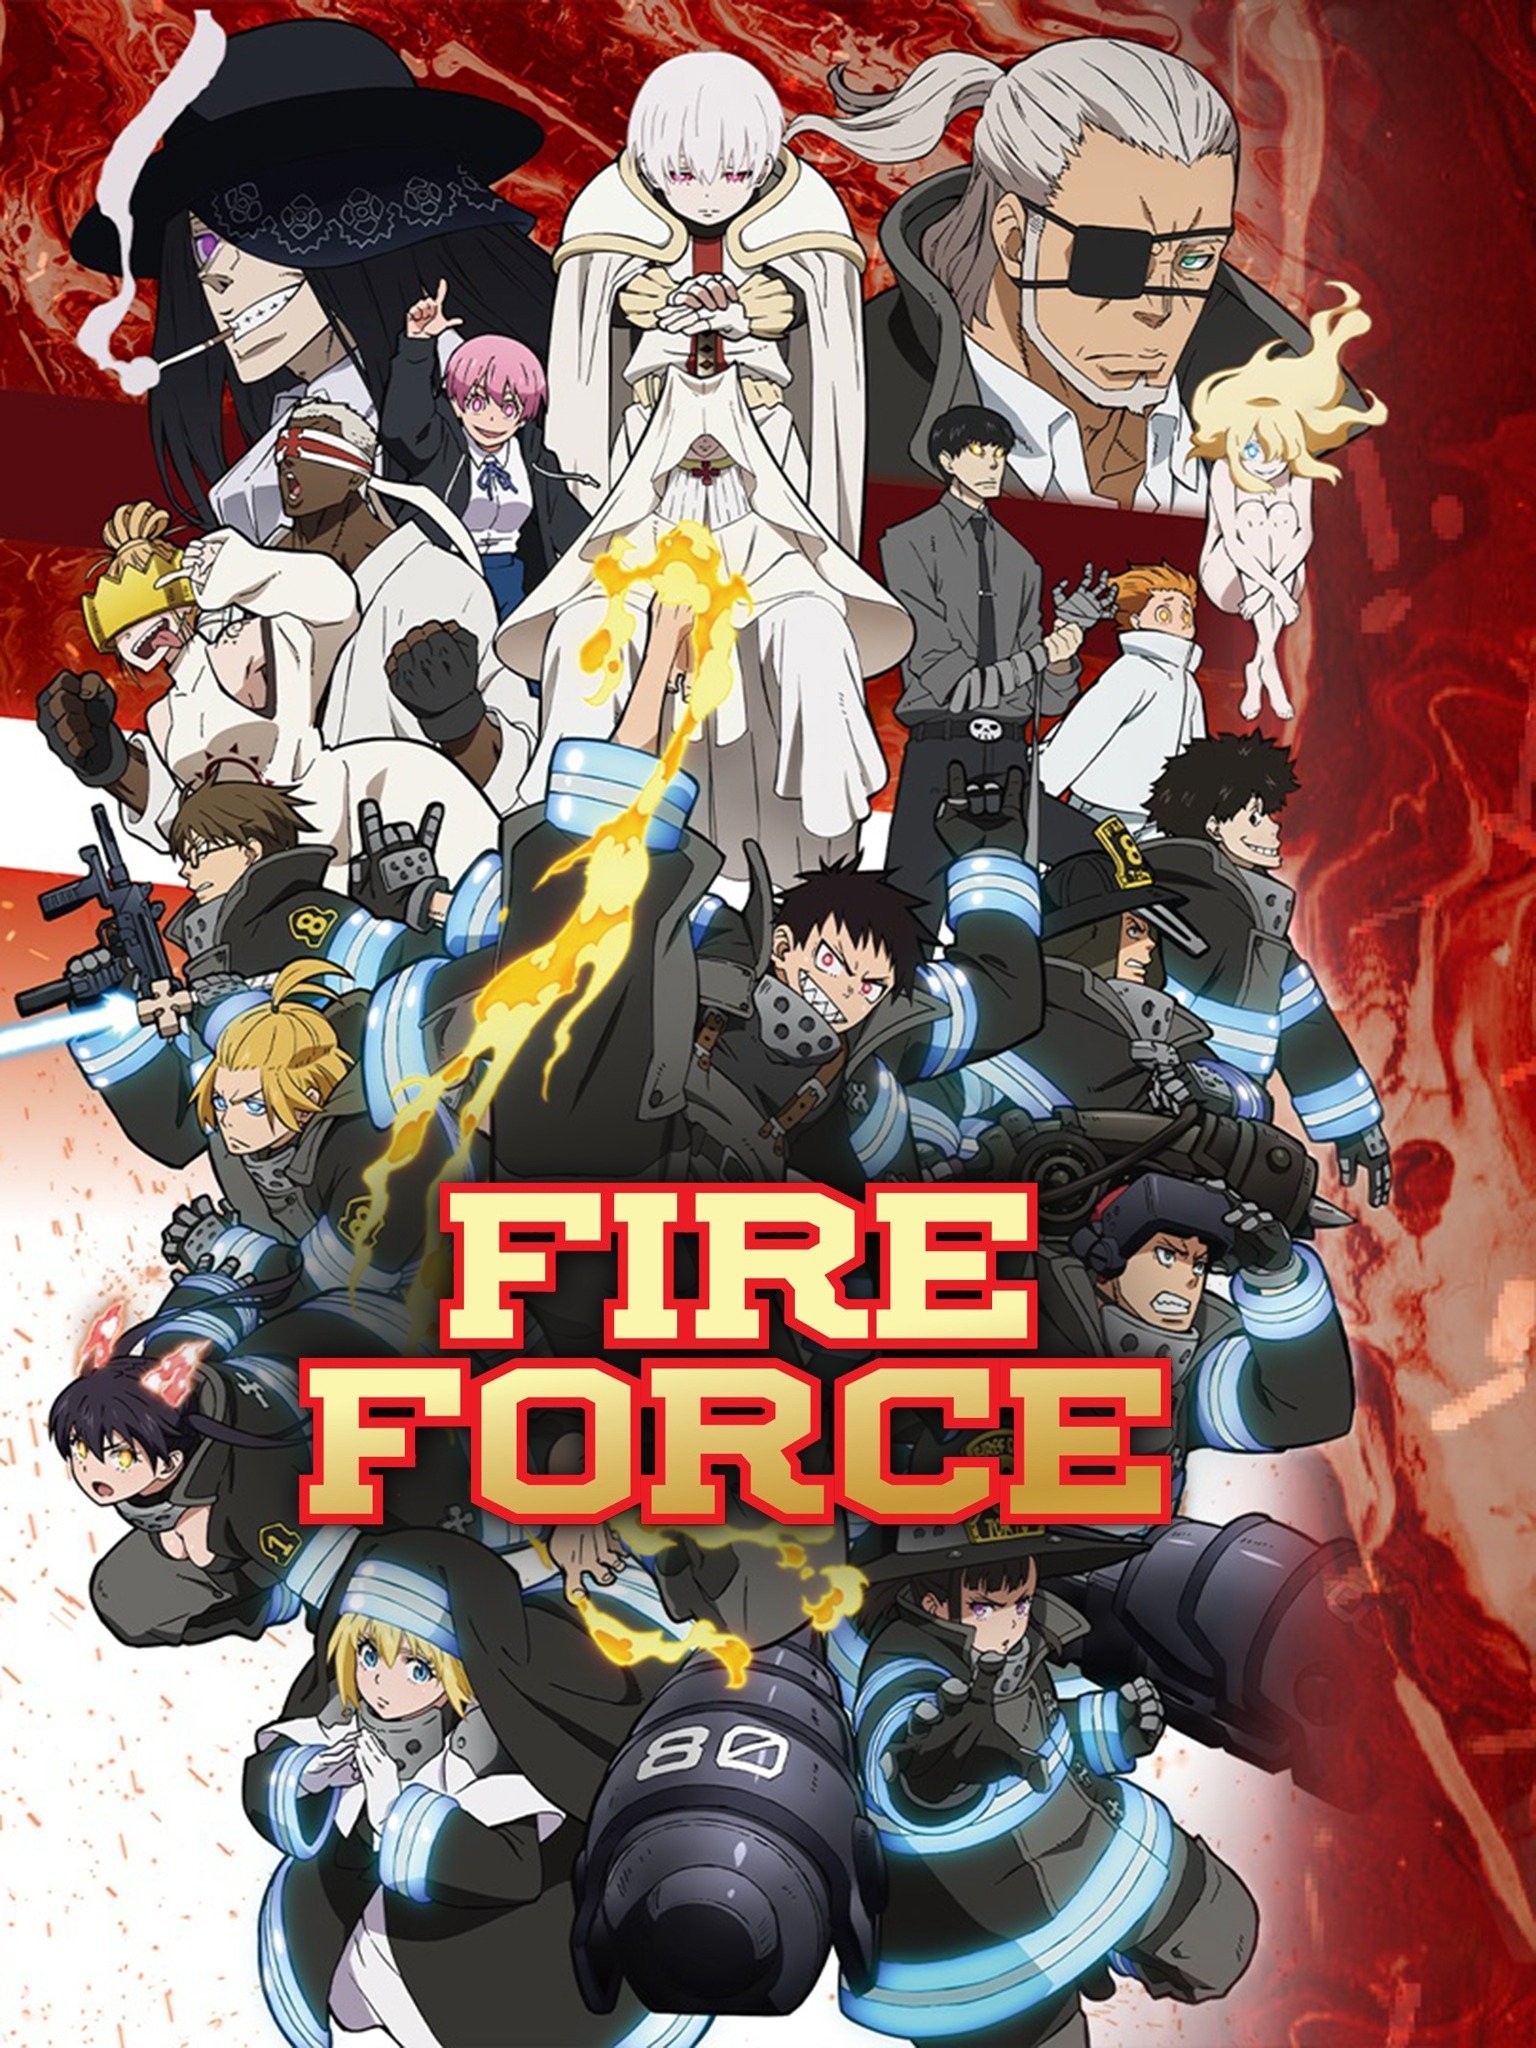  Review for Fire Force - Season 2 Part 1